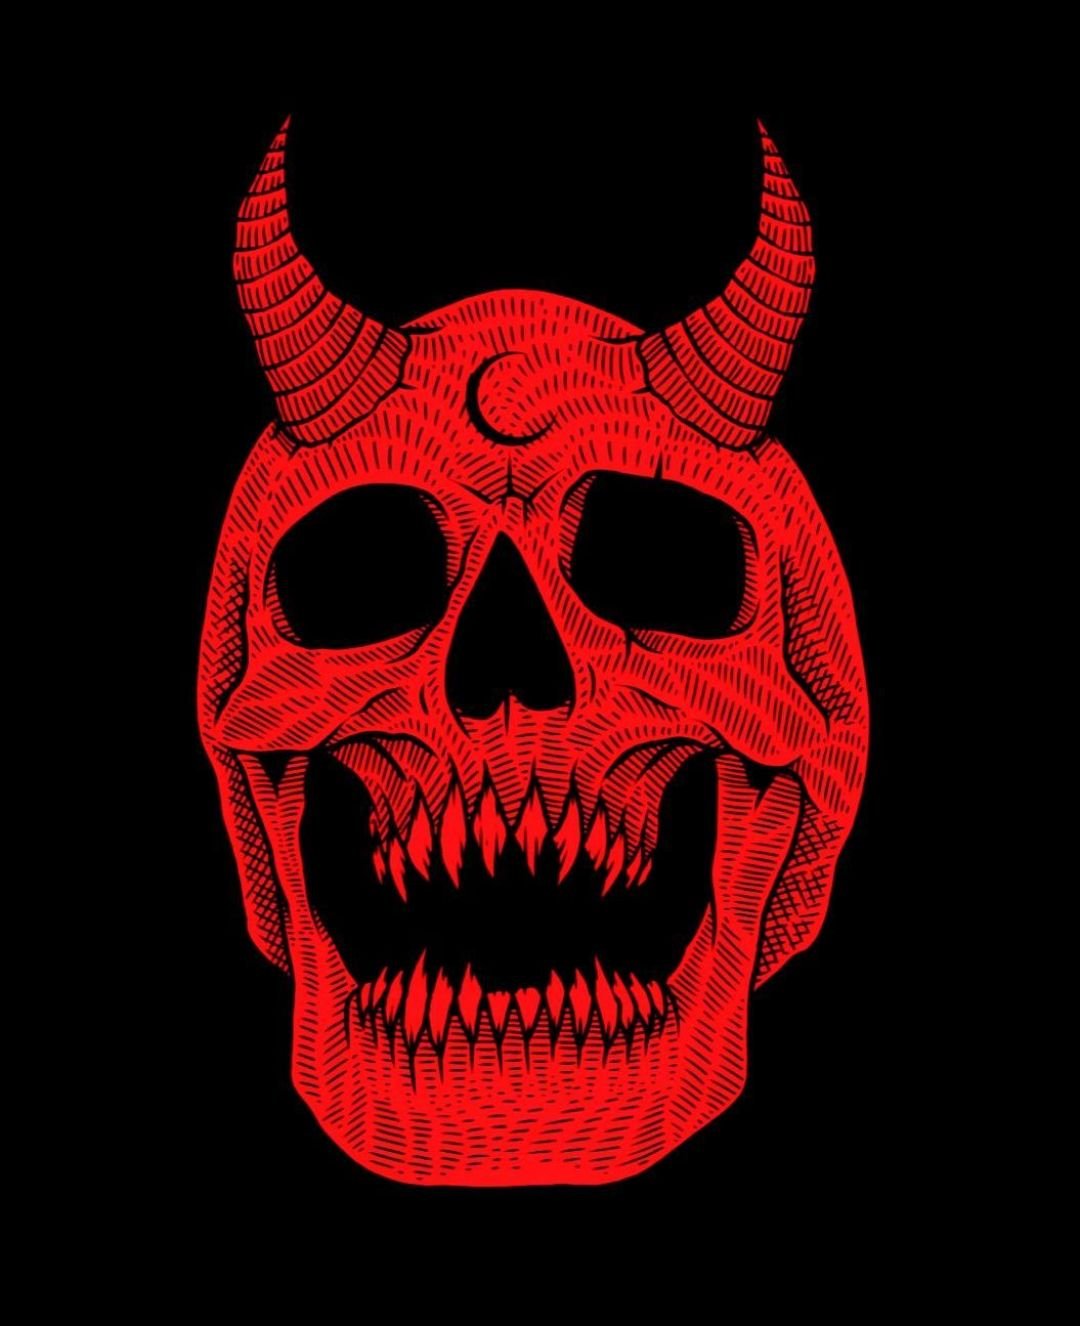 Red one skull. Skeletons in 2019. Red aesthetic, Satanic art / iPhone HD Wallpaper Background Download HD Wallpaper (Desktop Background / Android / iPhone) (1080p, 4k) (1080x1326) (2021)